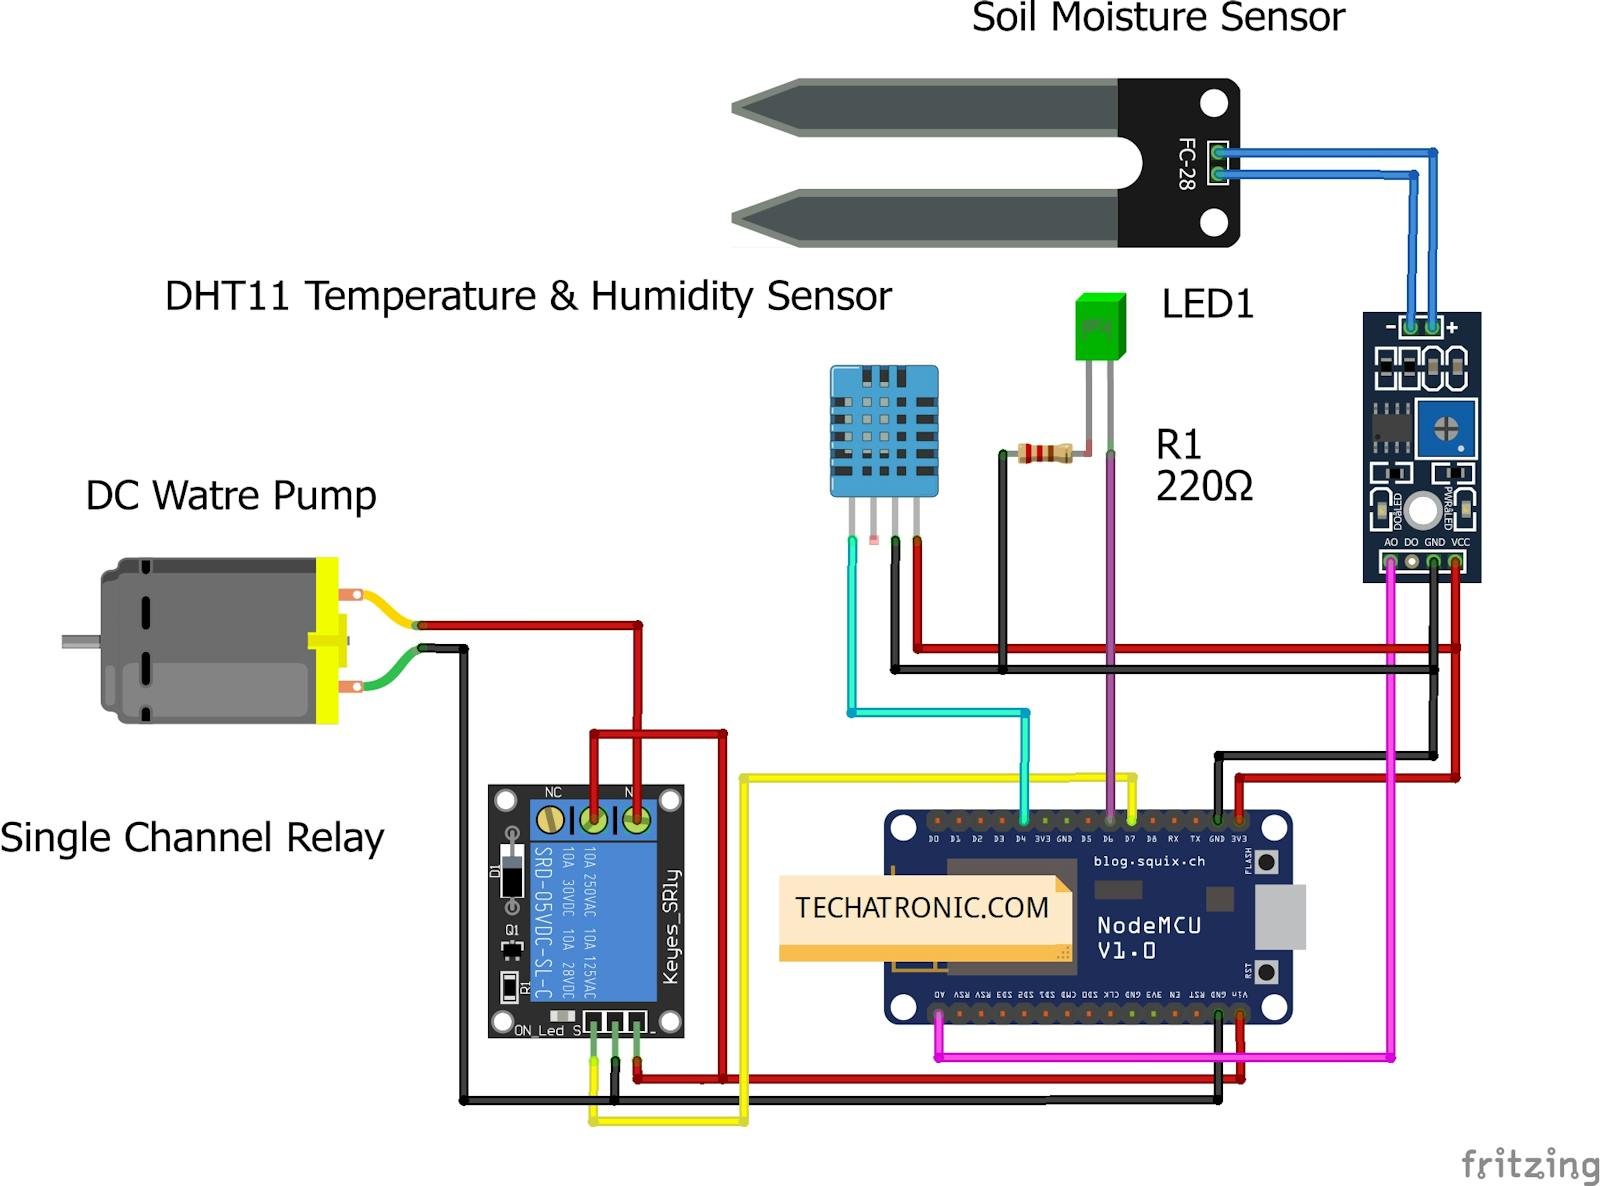 Monitor Soil Moisture With An ESP8266 And A Hygrometer - Make